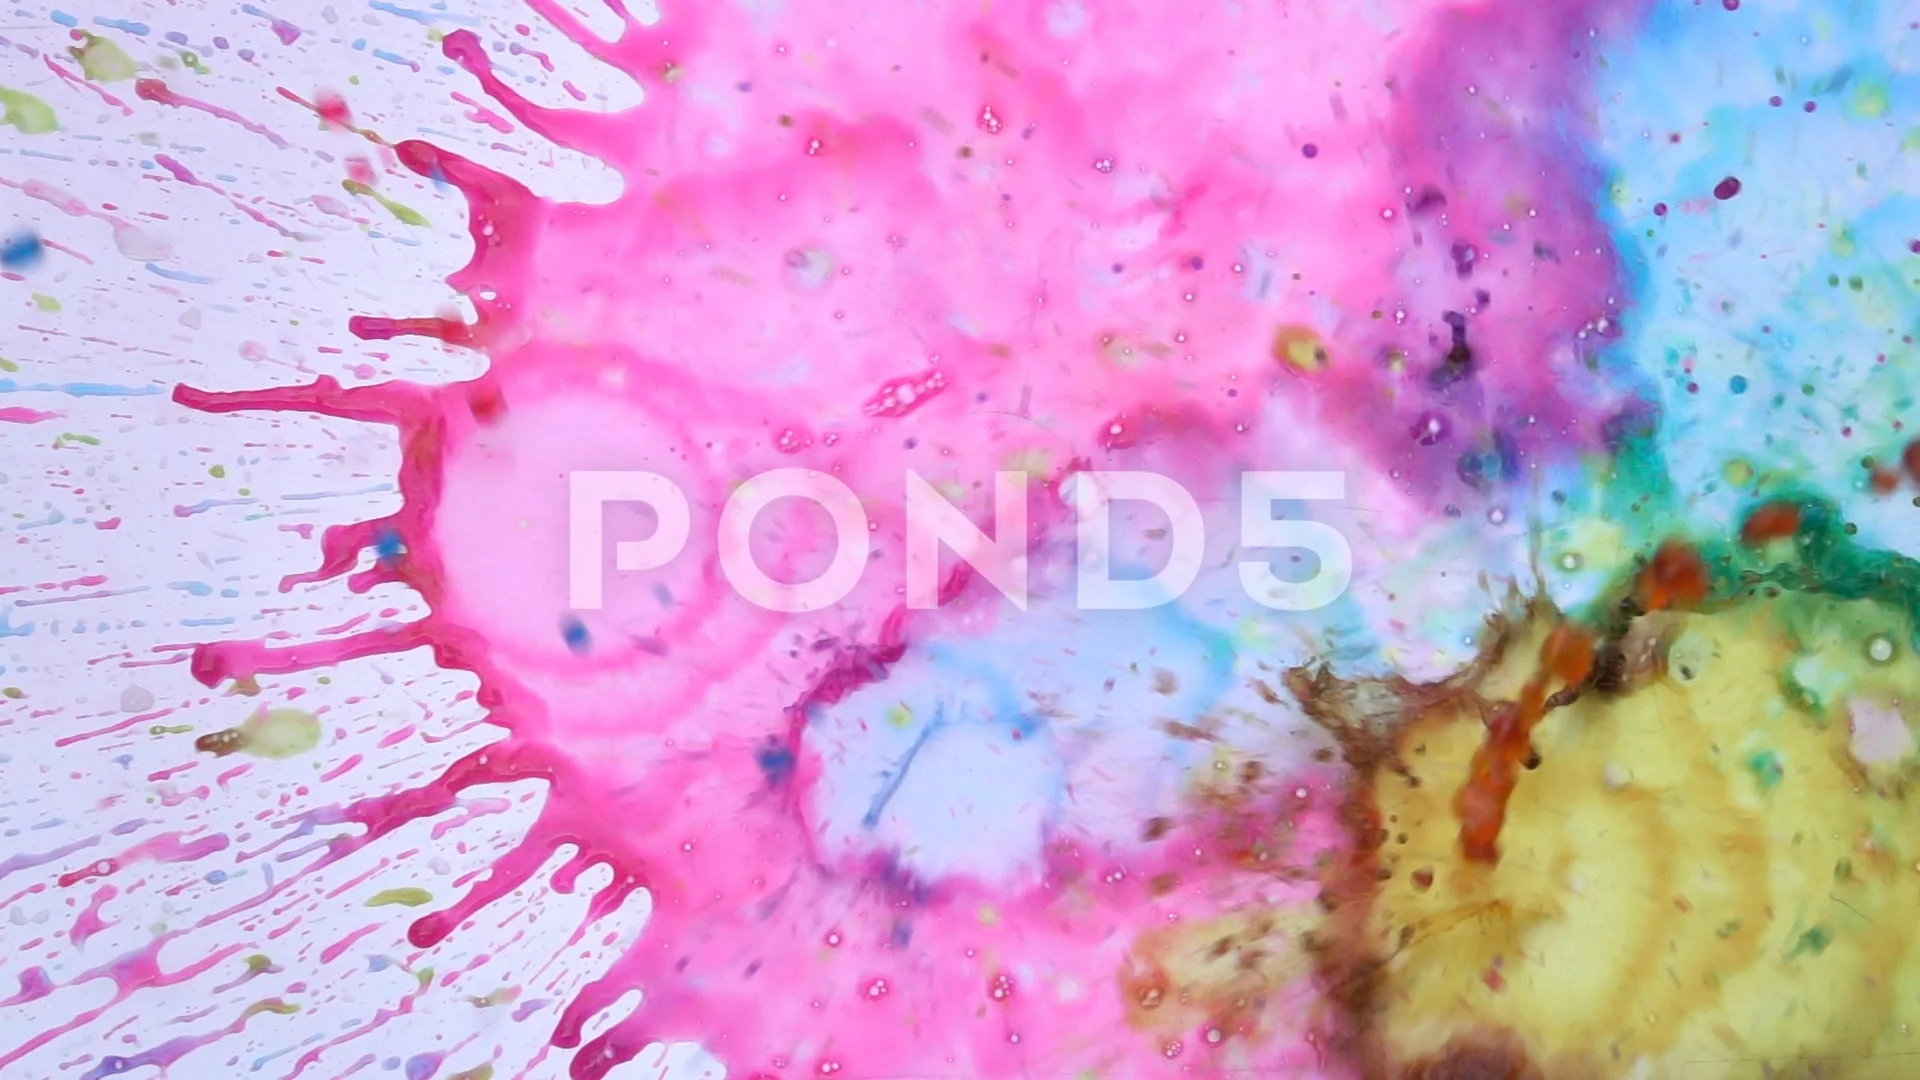 Red Color Splash Stock Footage ~ Royalty Free Stock Videos | Pond5